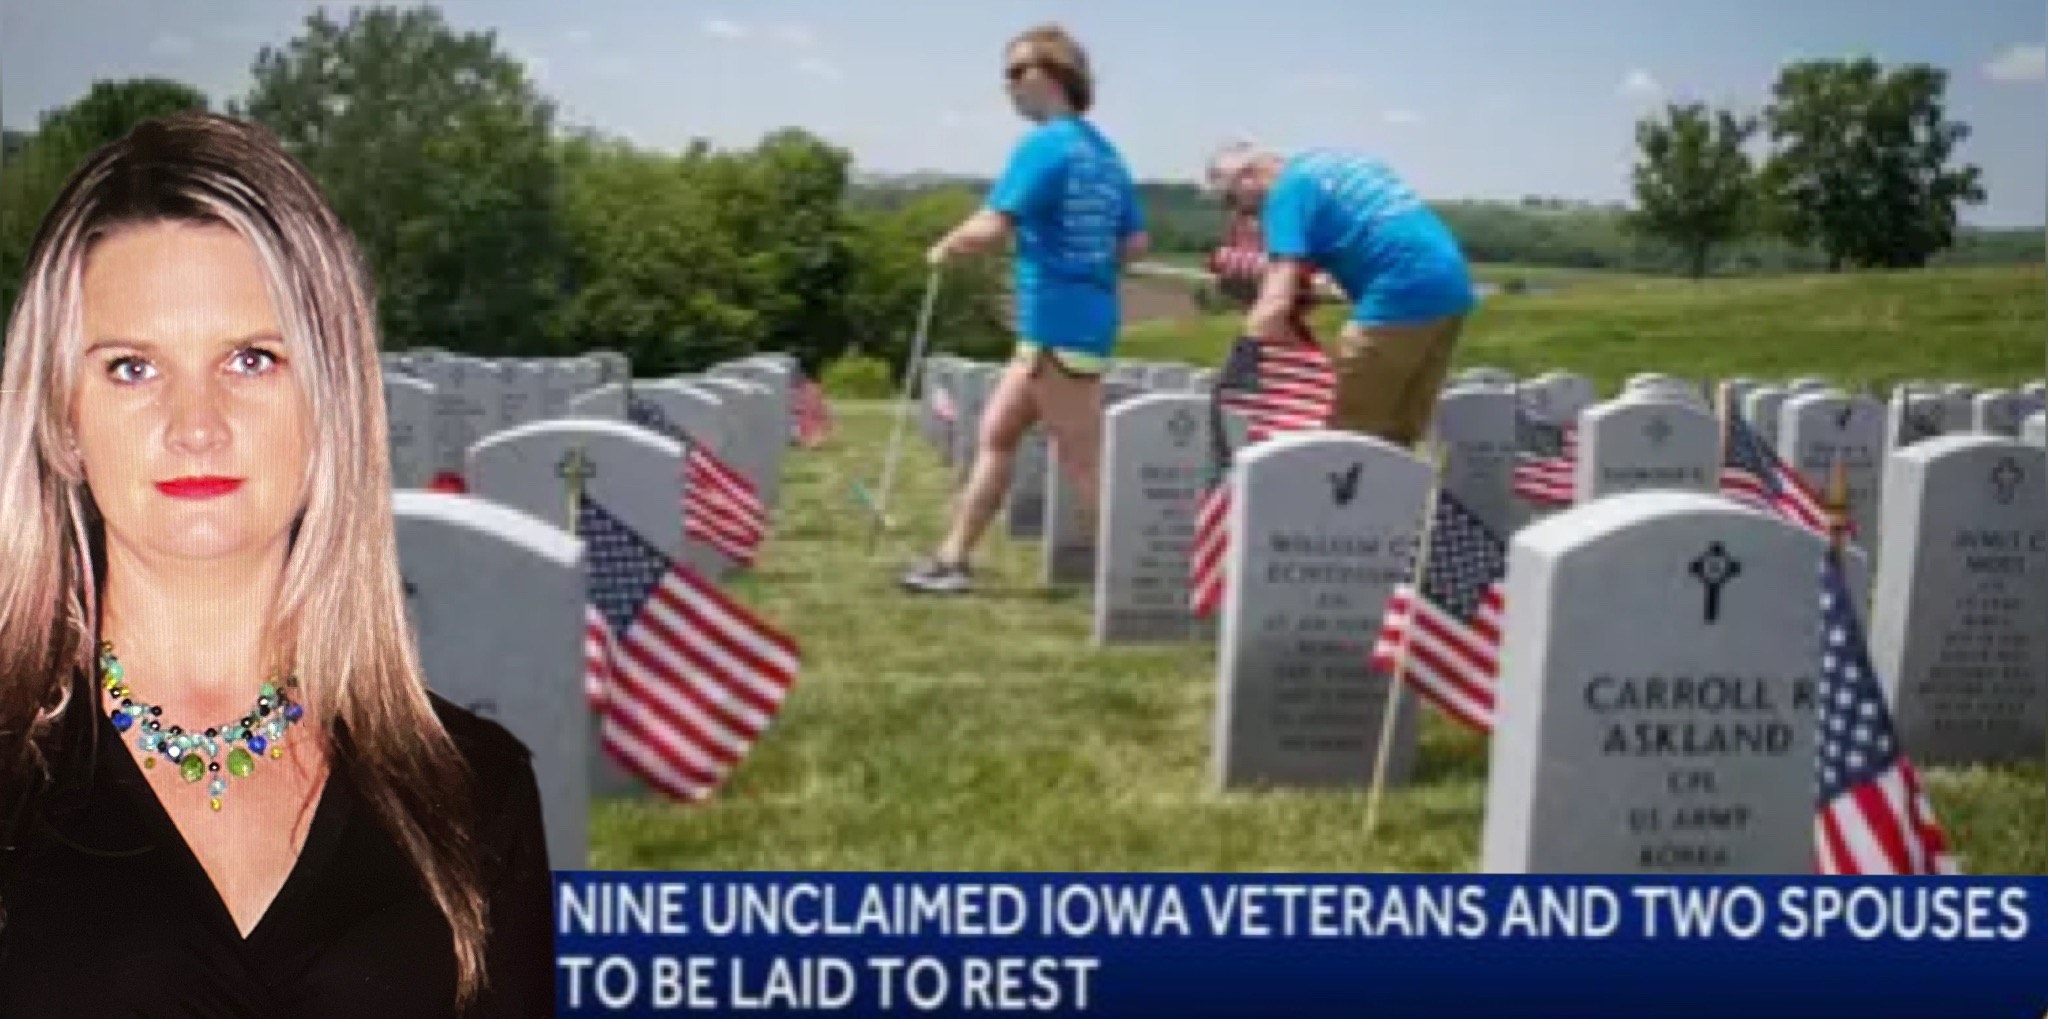 She Buried Over 60 Unclaimed People, Including Many Veterans